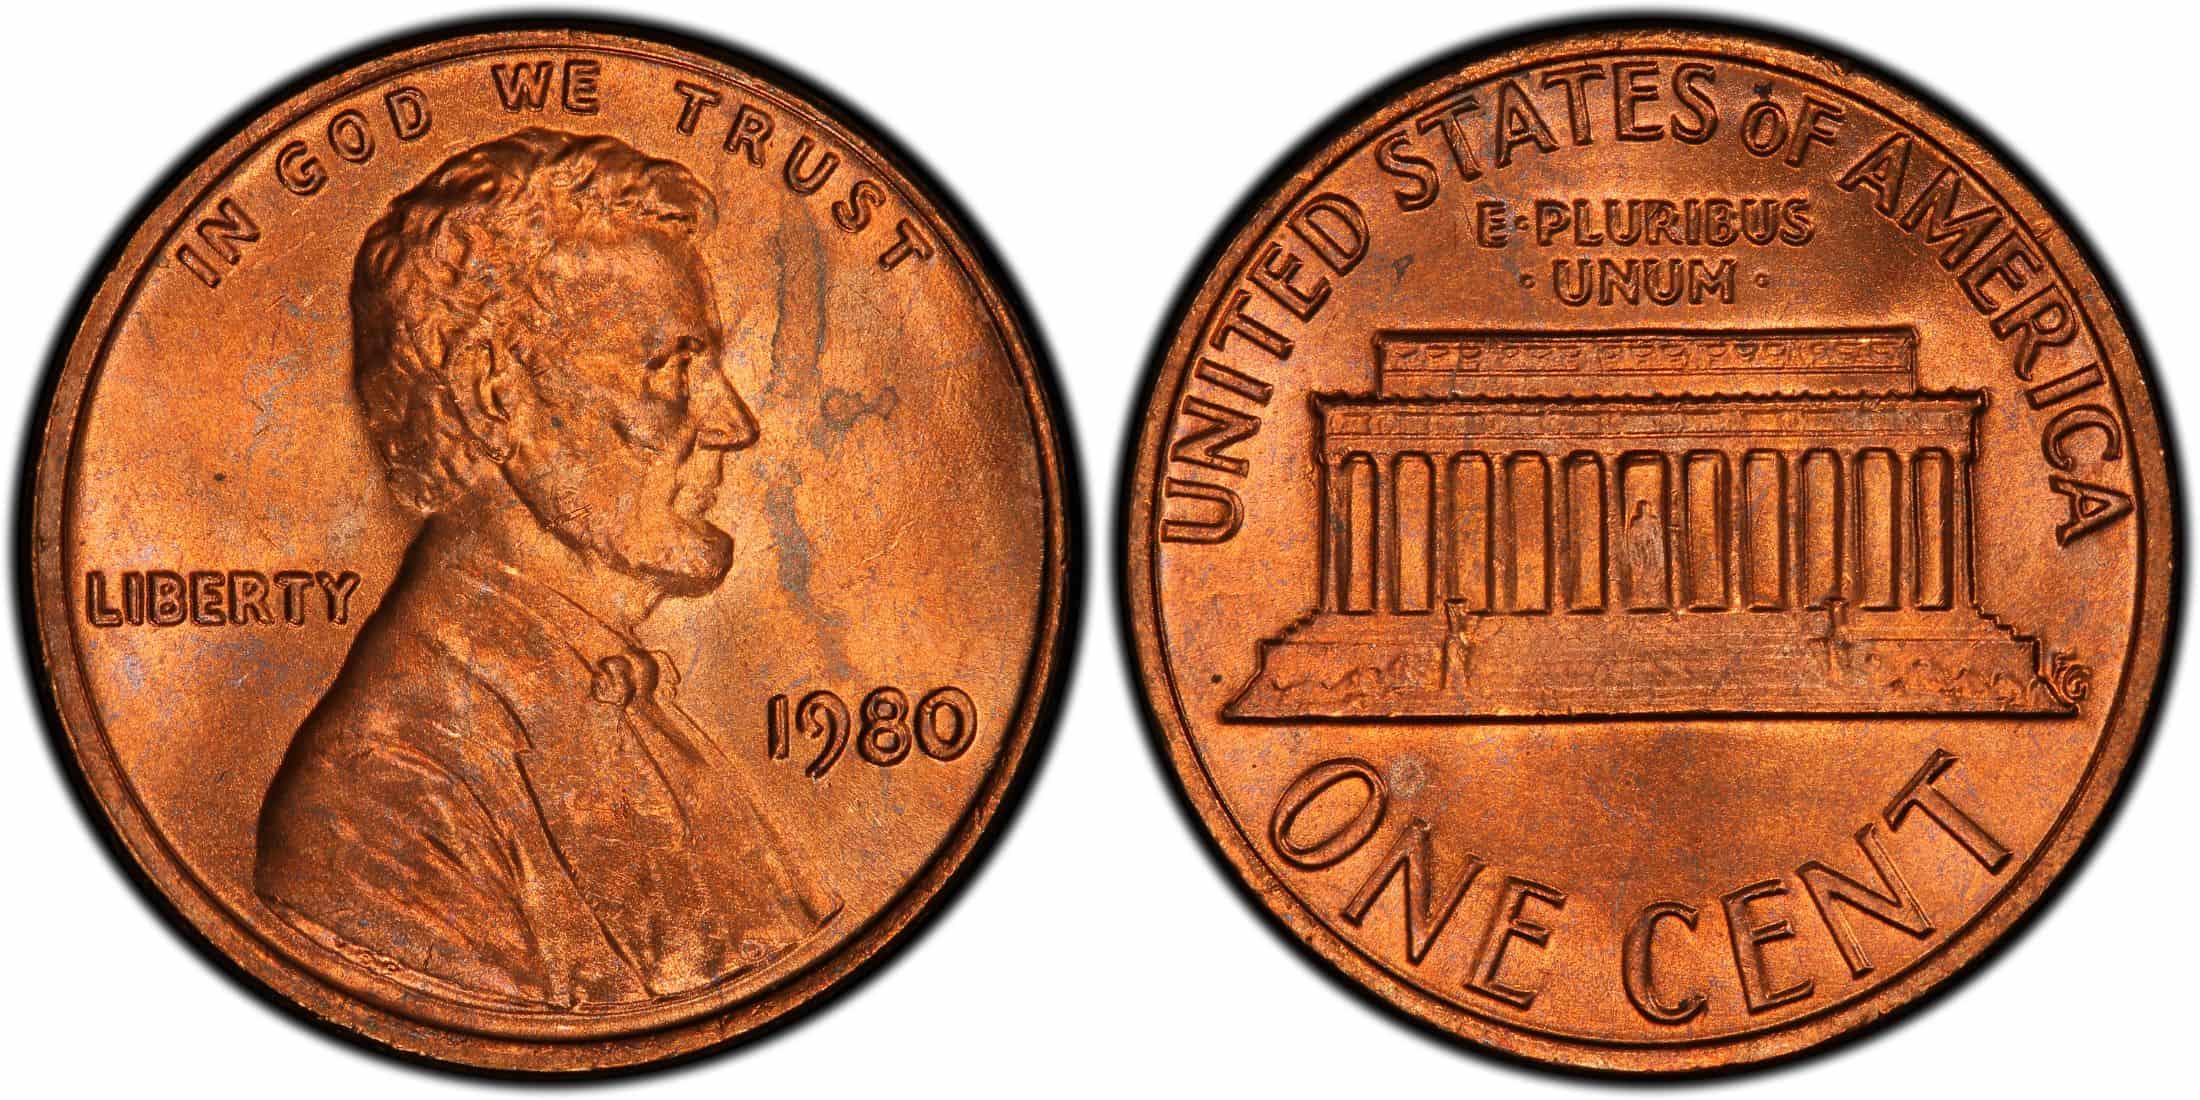 1980 Penny Value